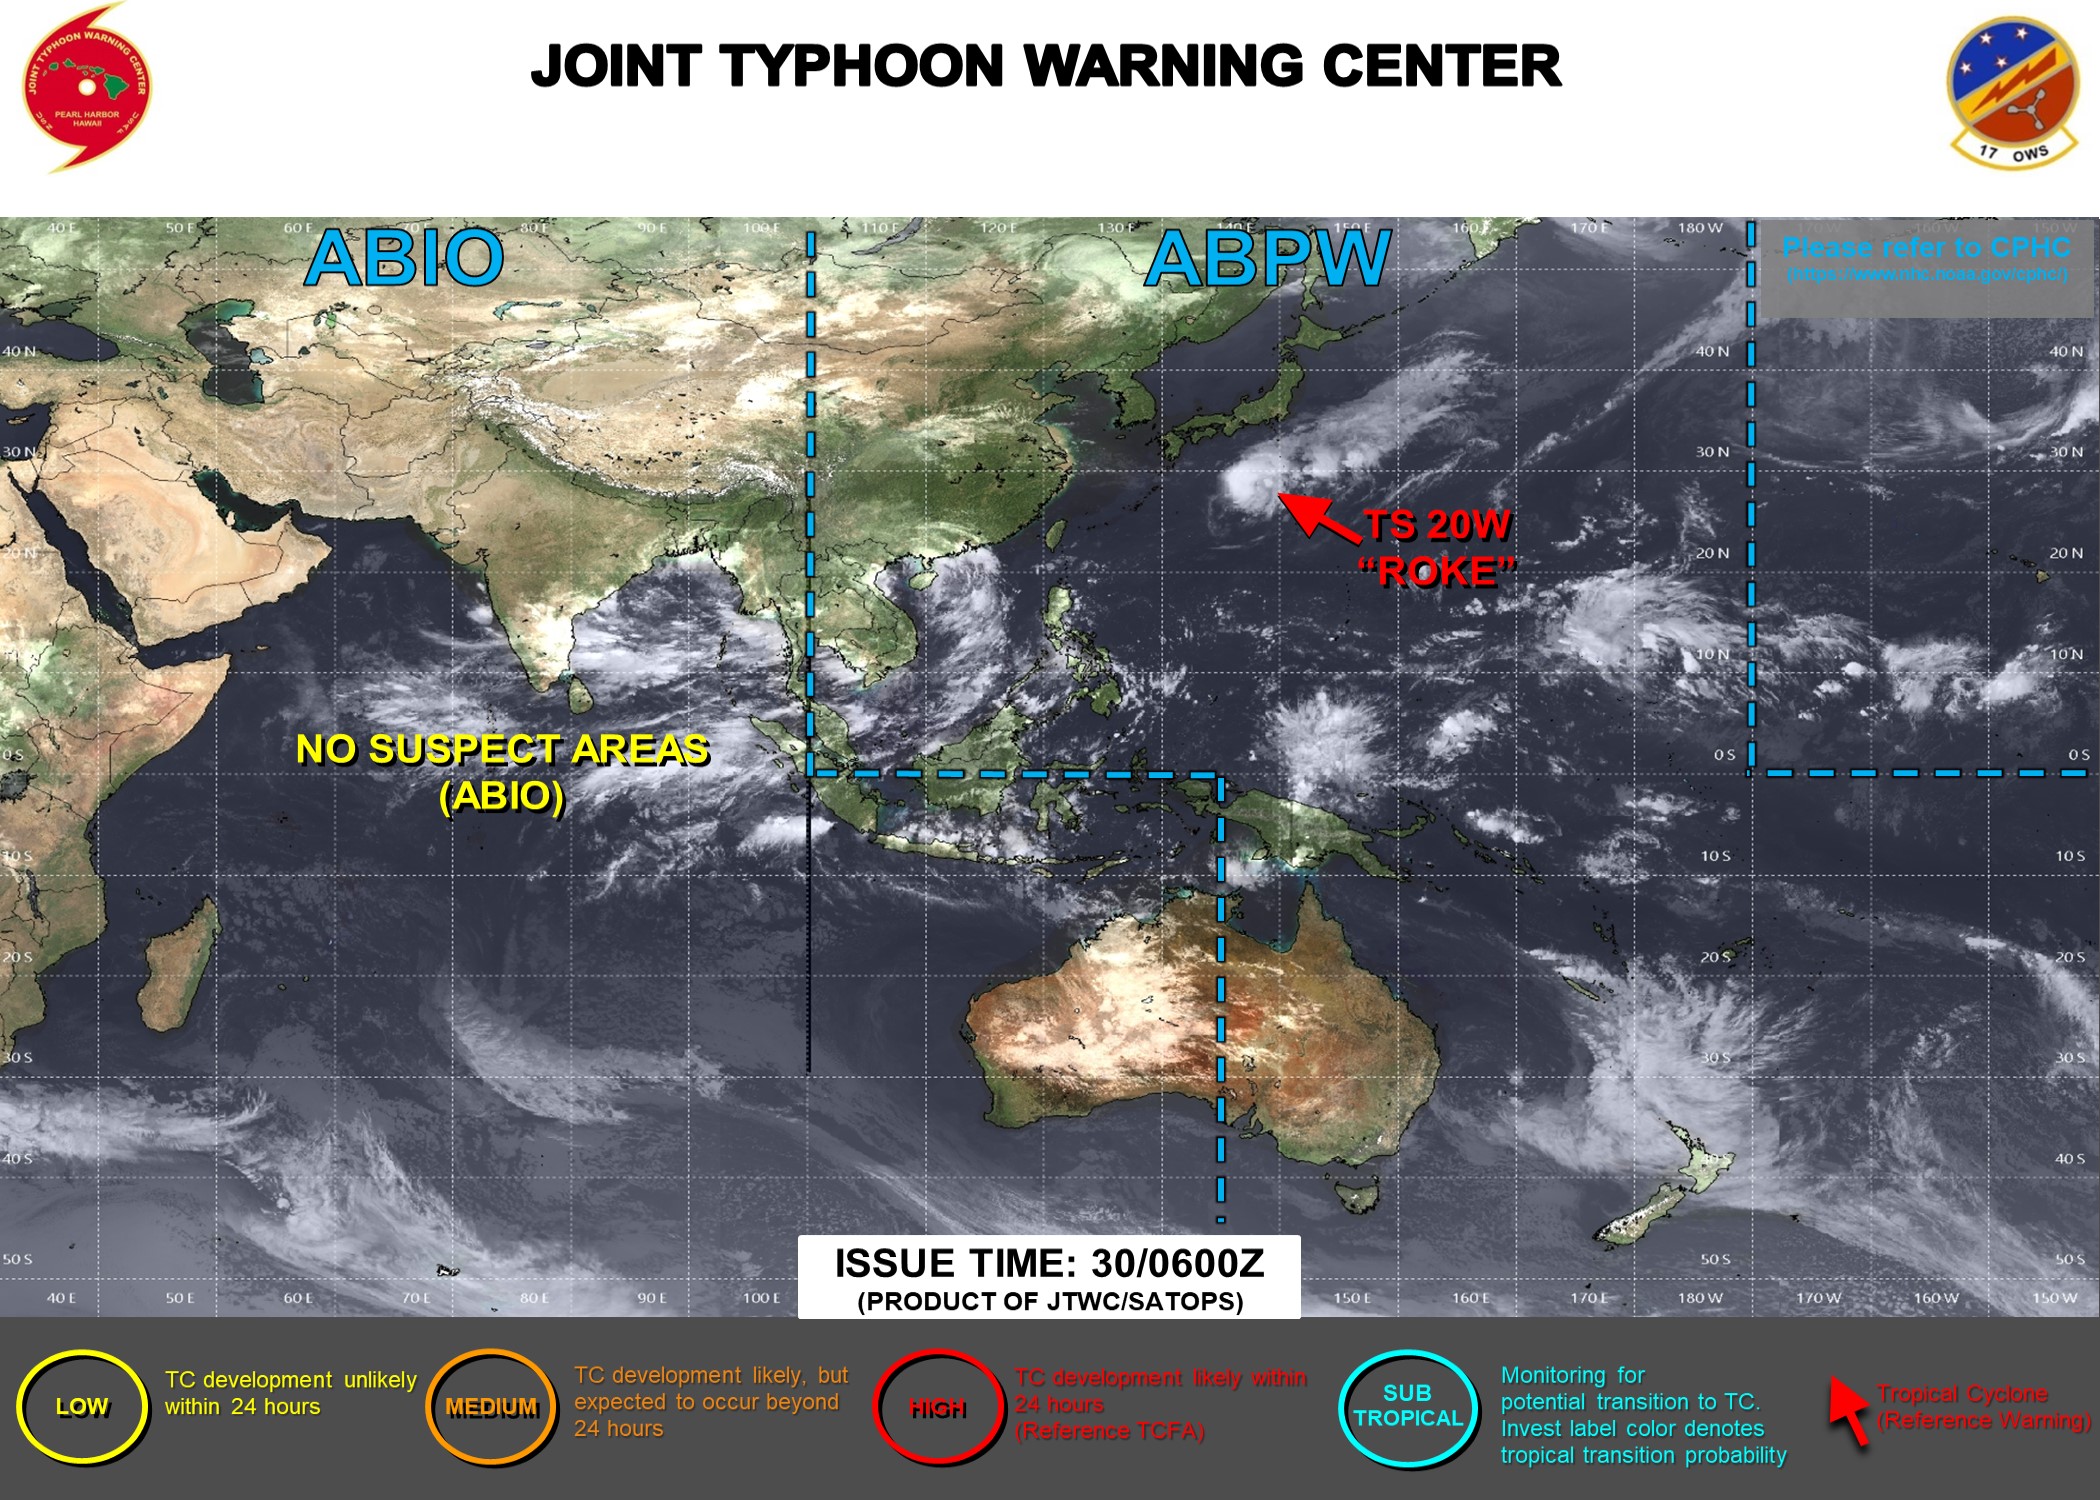 JTWC IS ISSUING 6HOURLY WARNINGS AND 3HOURLY SATELLITE BULLETINS ON 20W(ROKE).